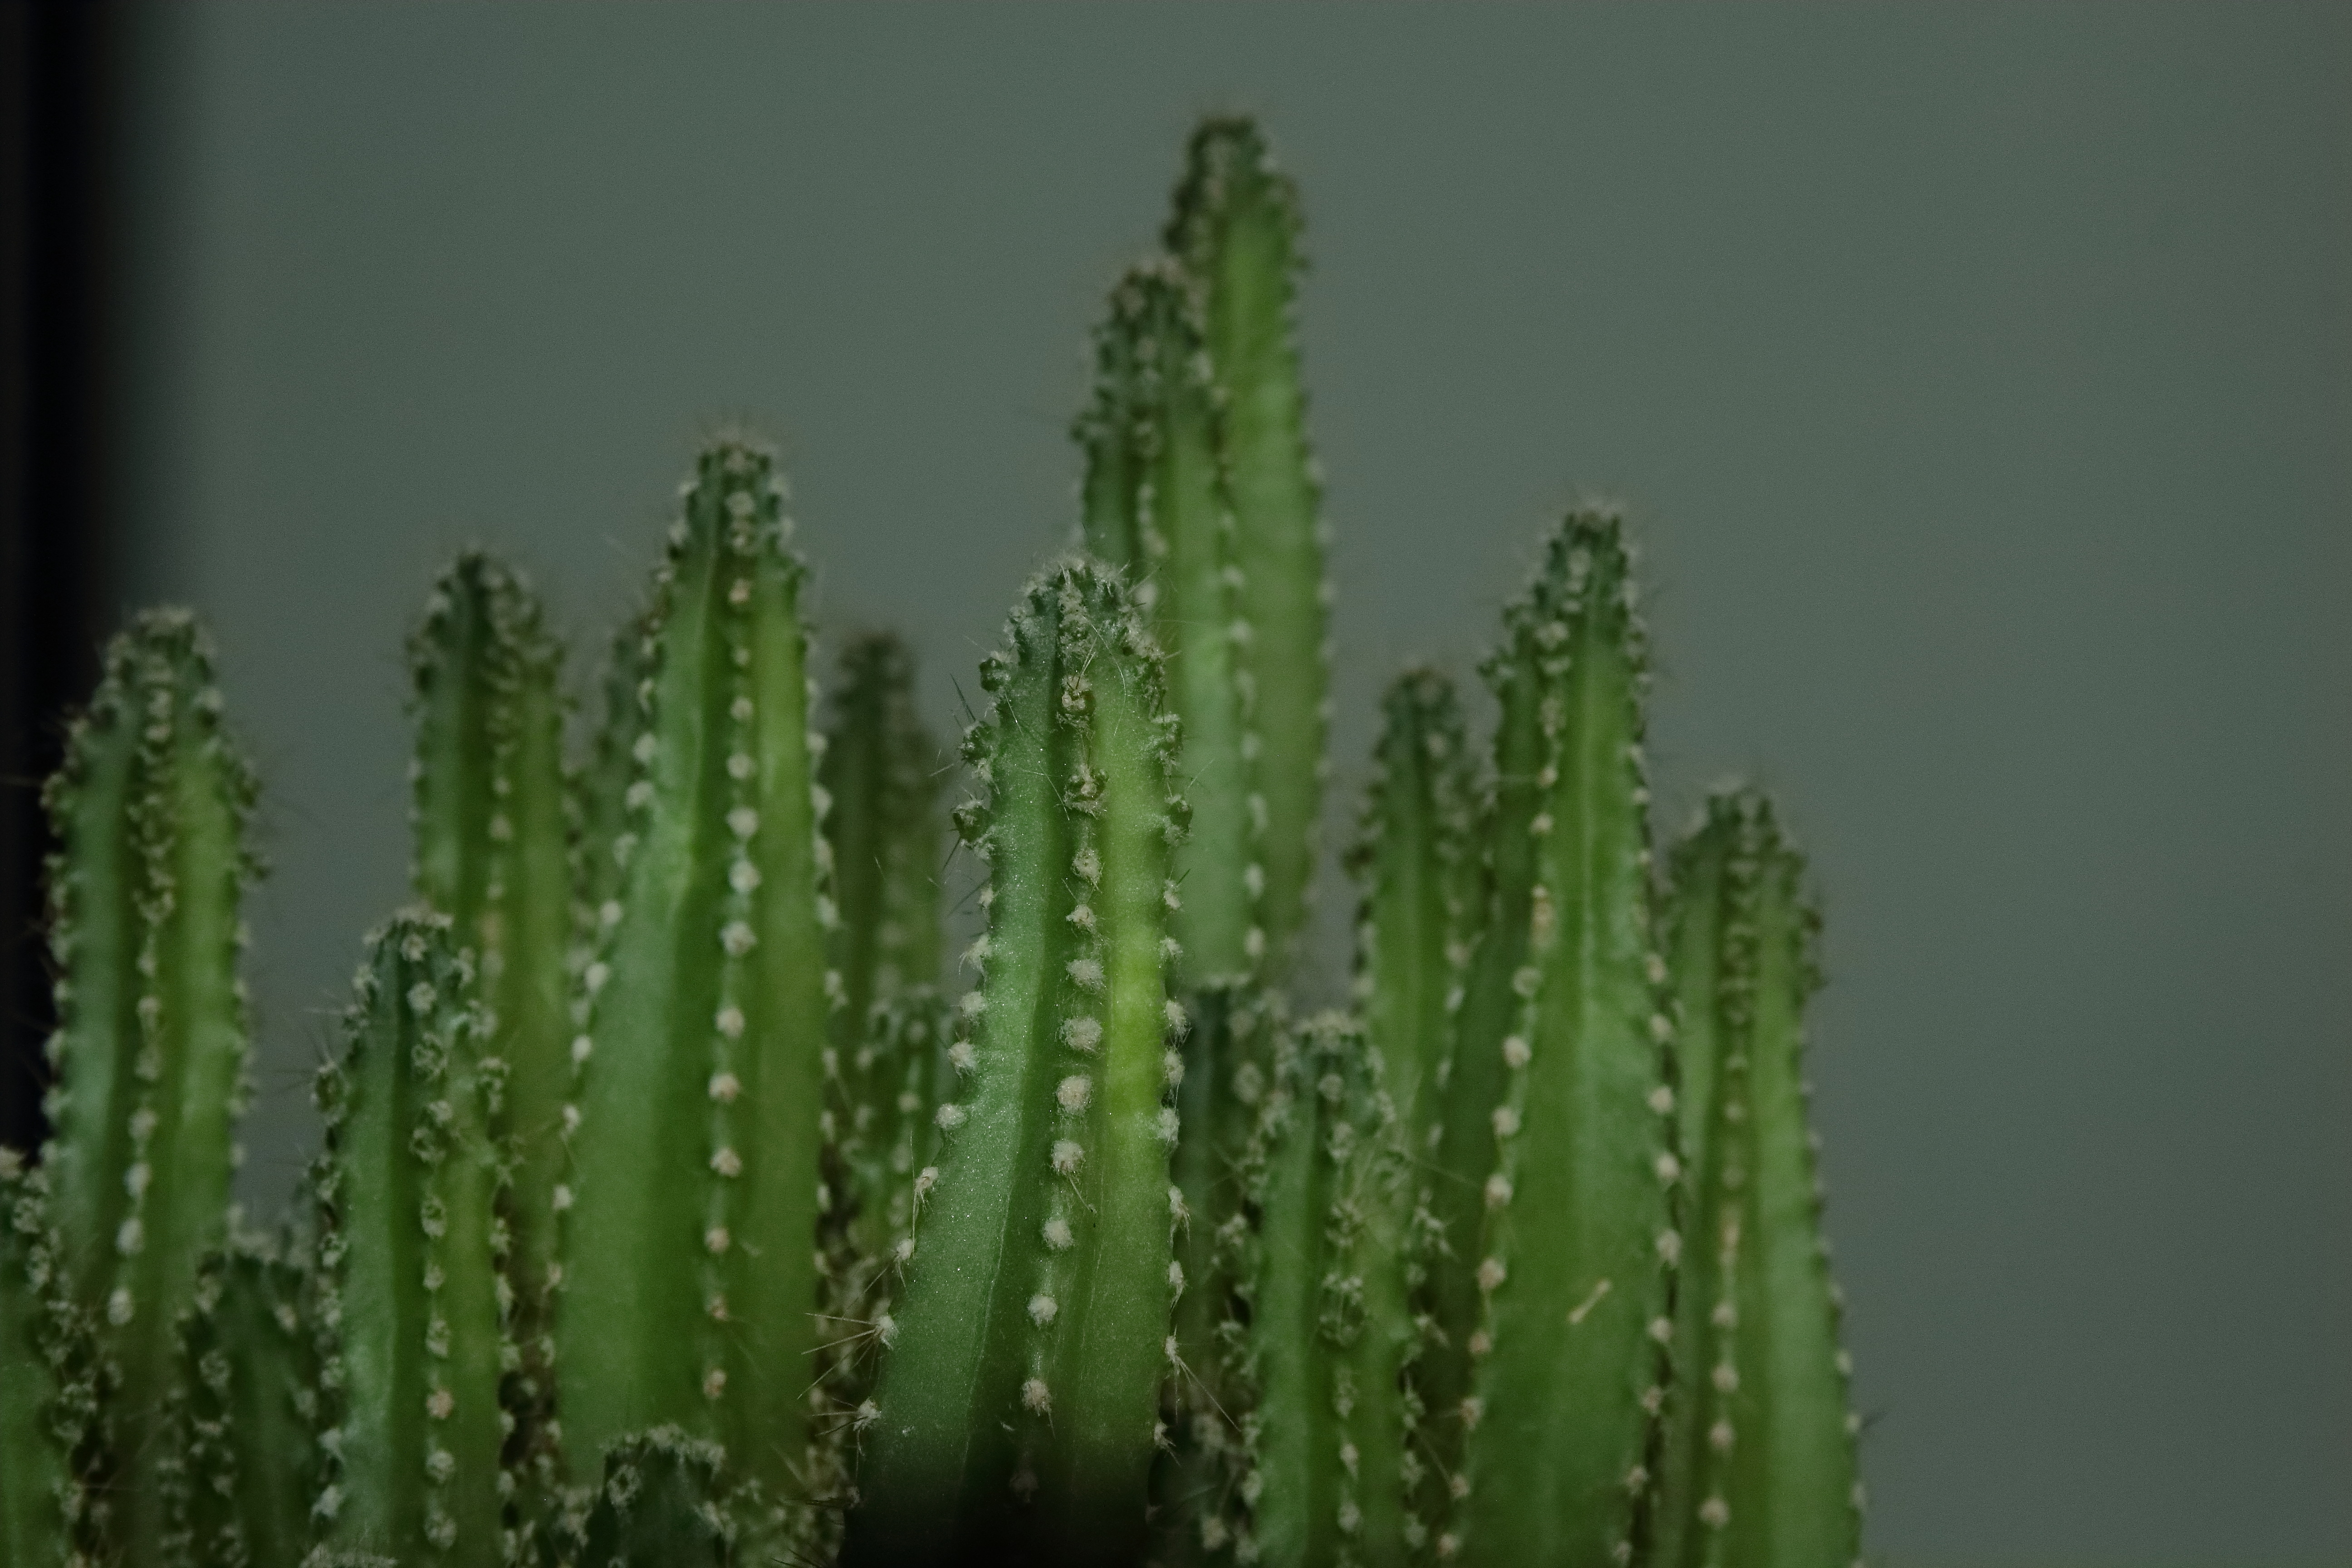 A detailed picture of a small cactus